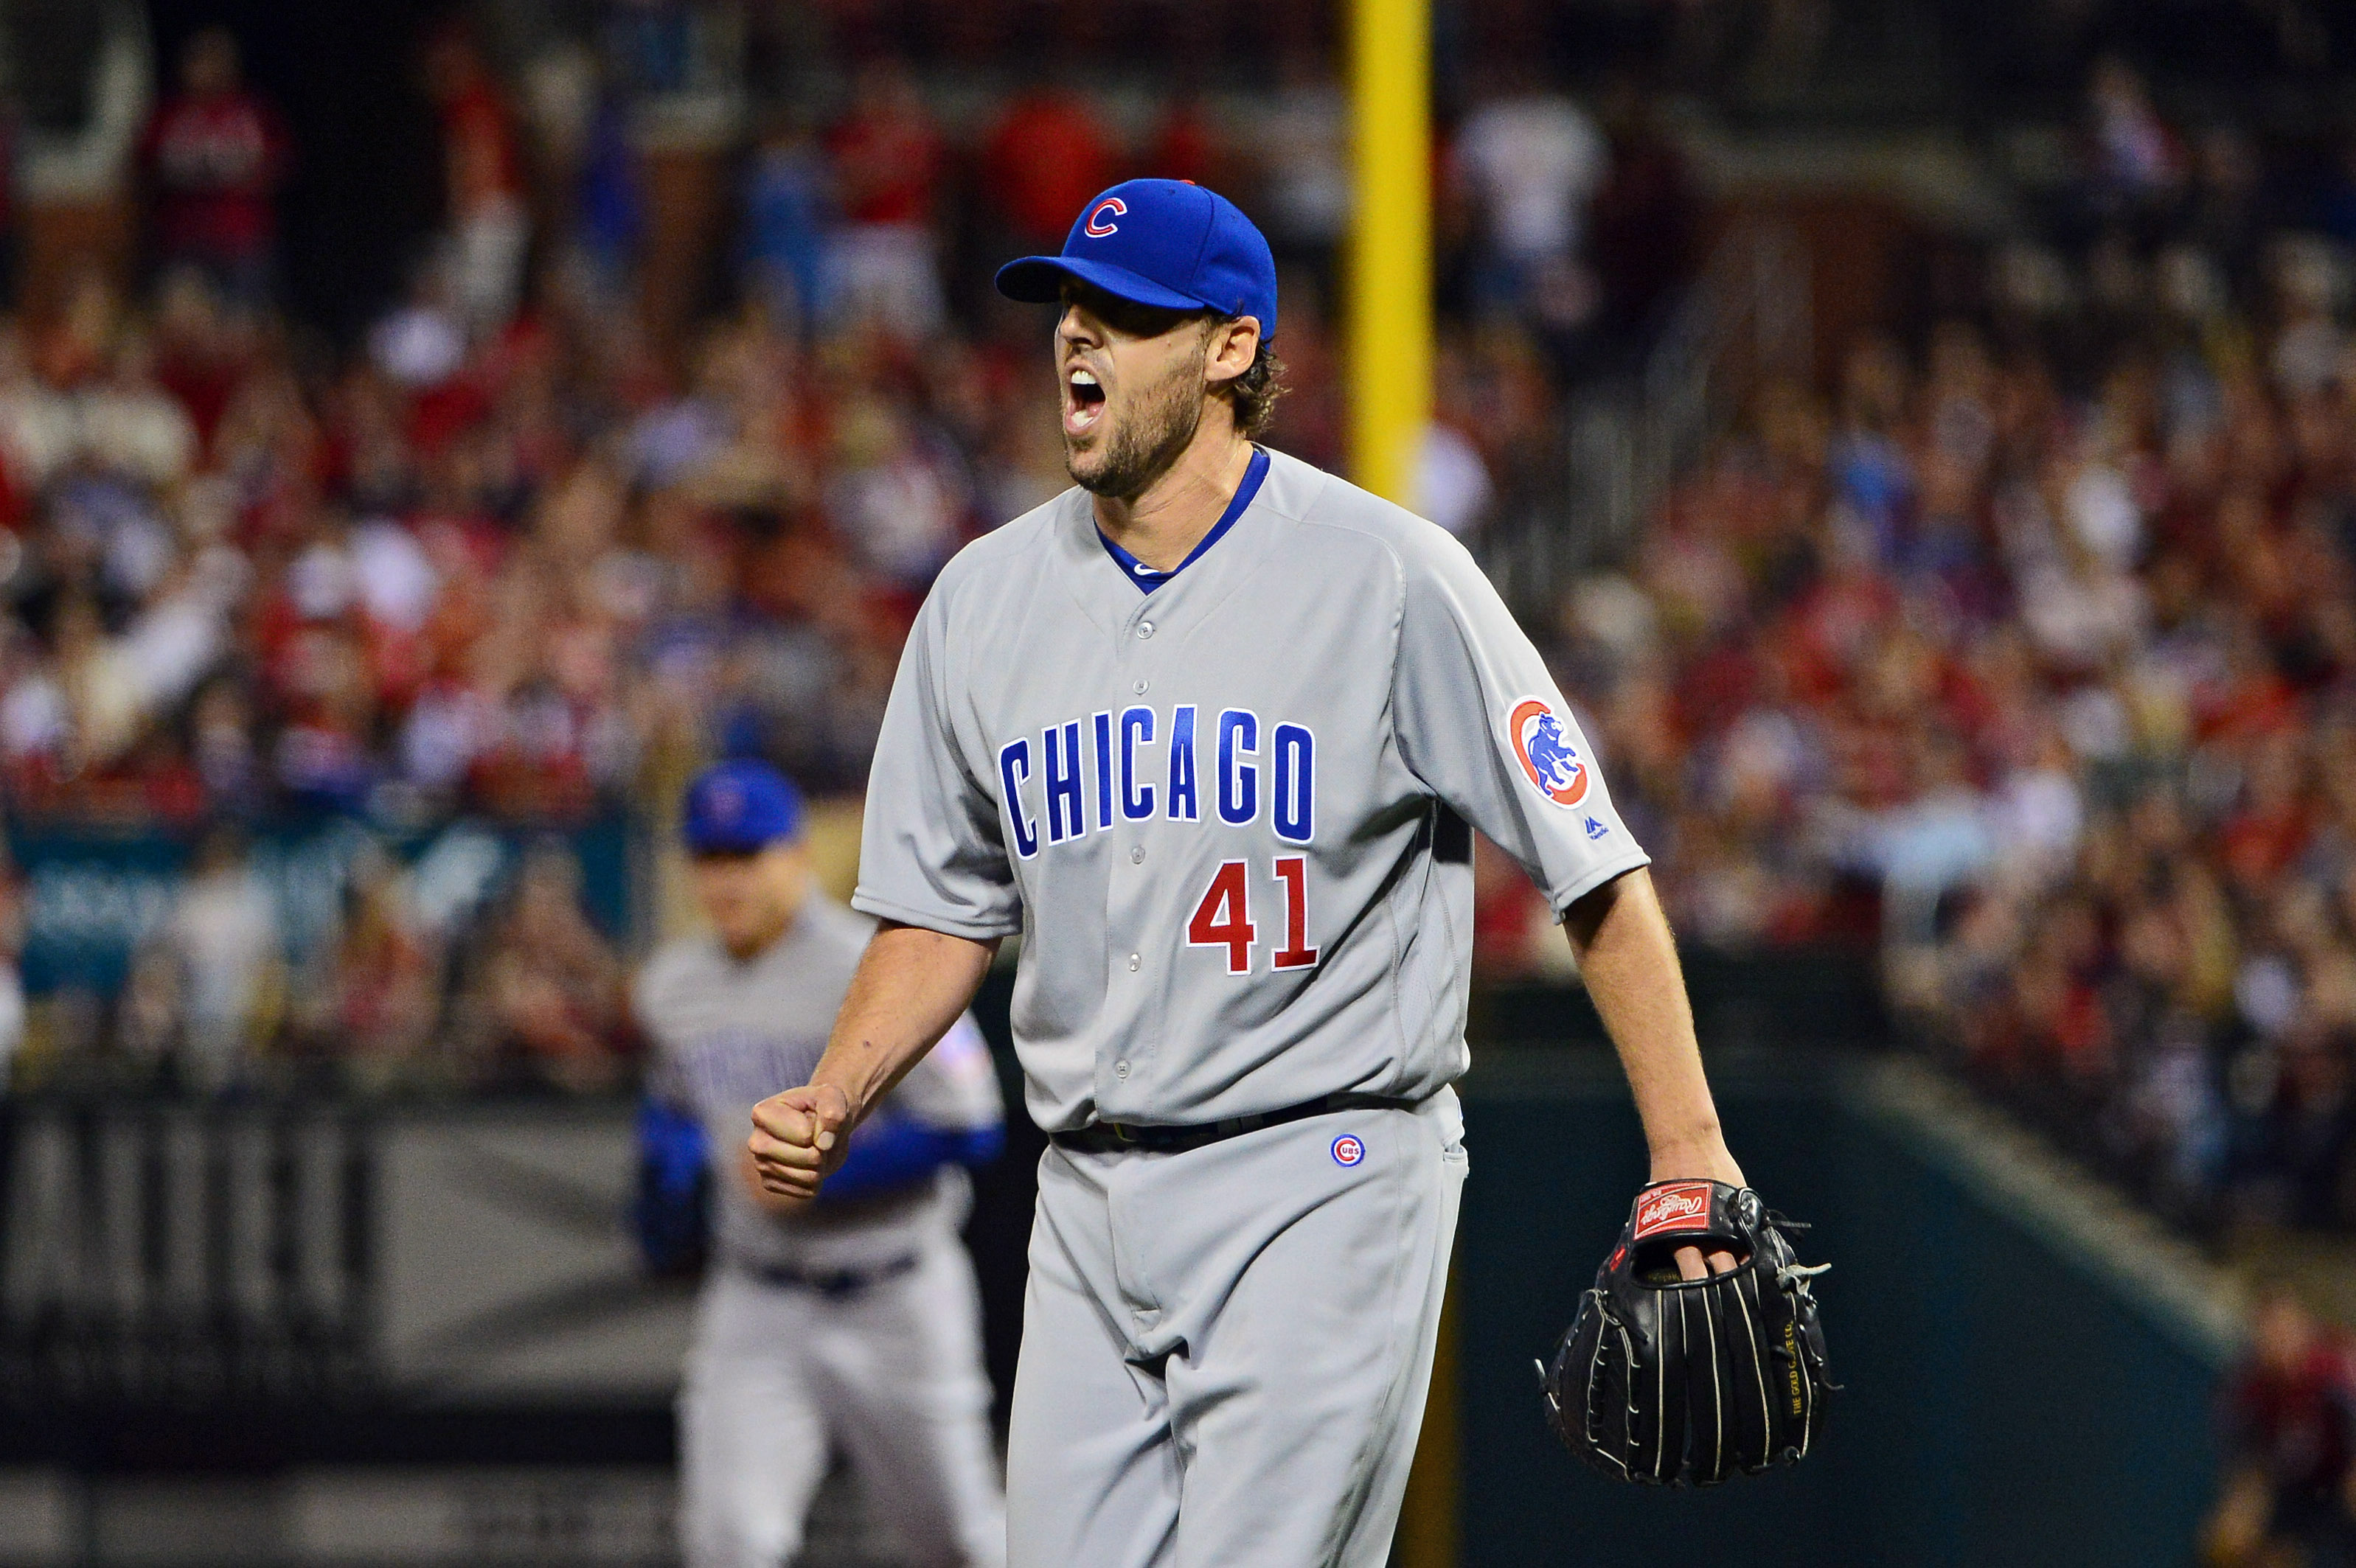 John Lackey's off to a hot start on the mound for Cubs